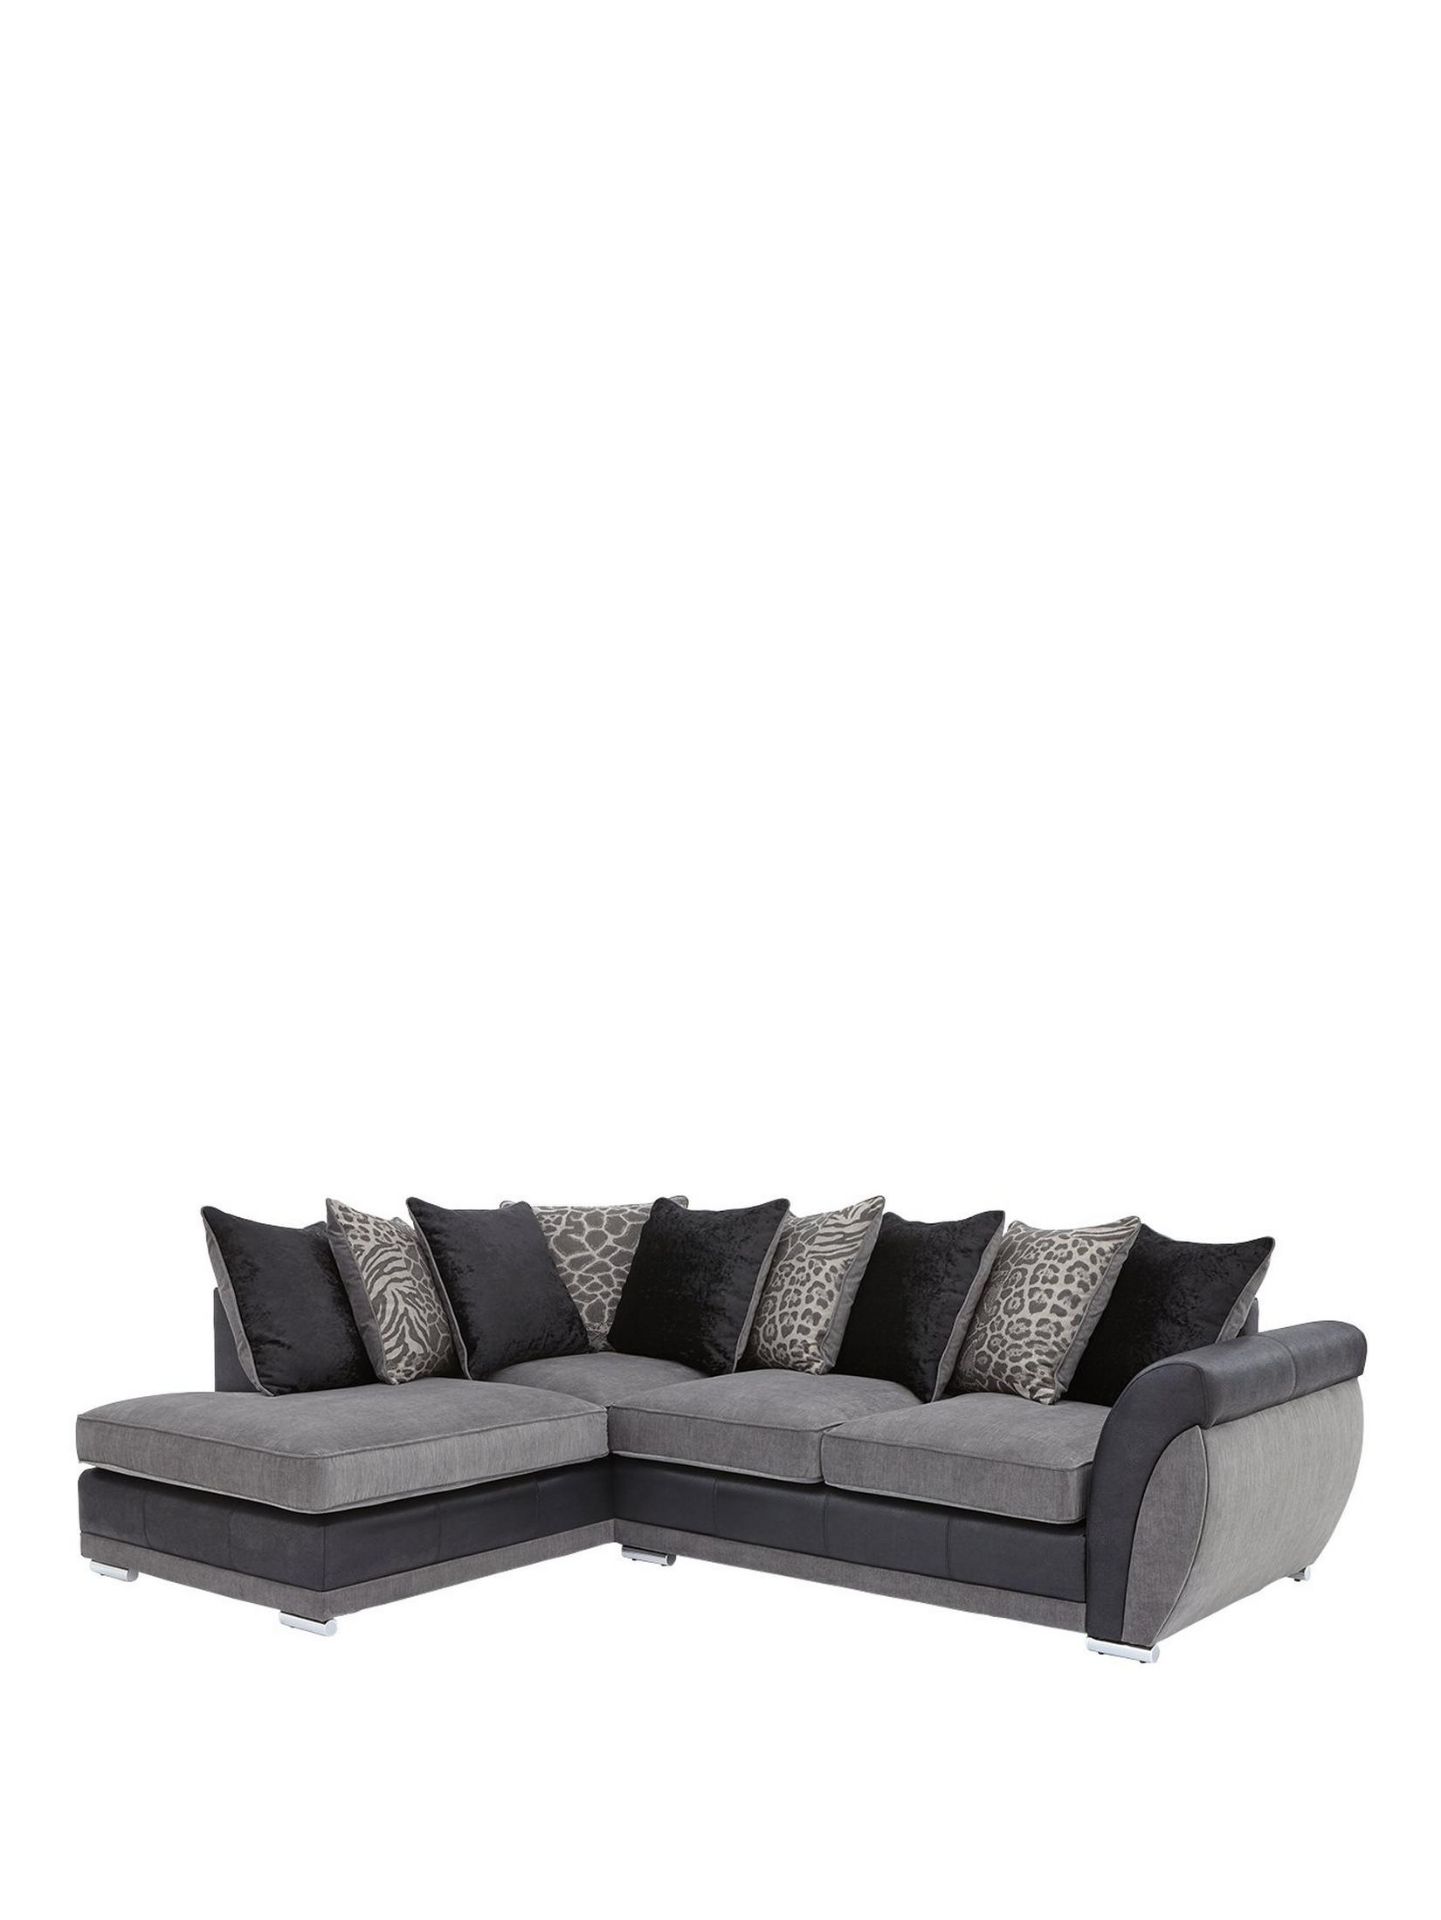 Hilton Lh Corner Chaise. RPP £1,249.00. Dimensions: Height 93, Width 253, Depth 194 cm (approx.) - Image 2 of 2